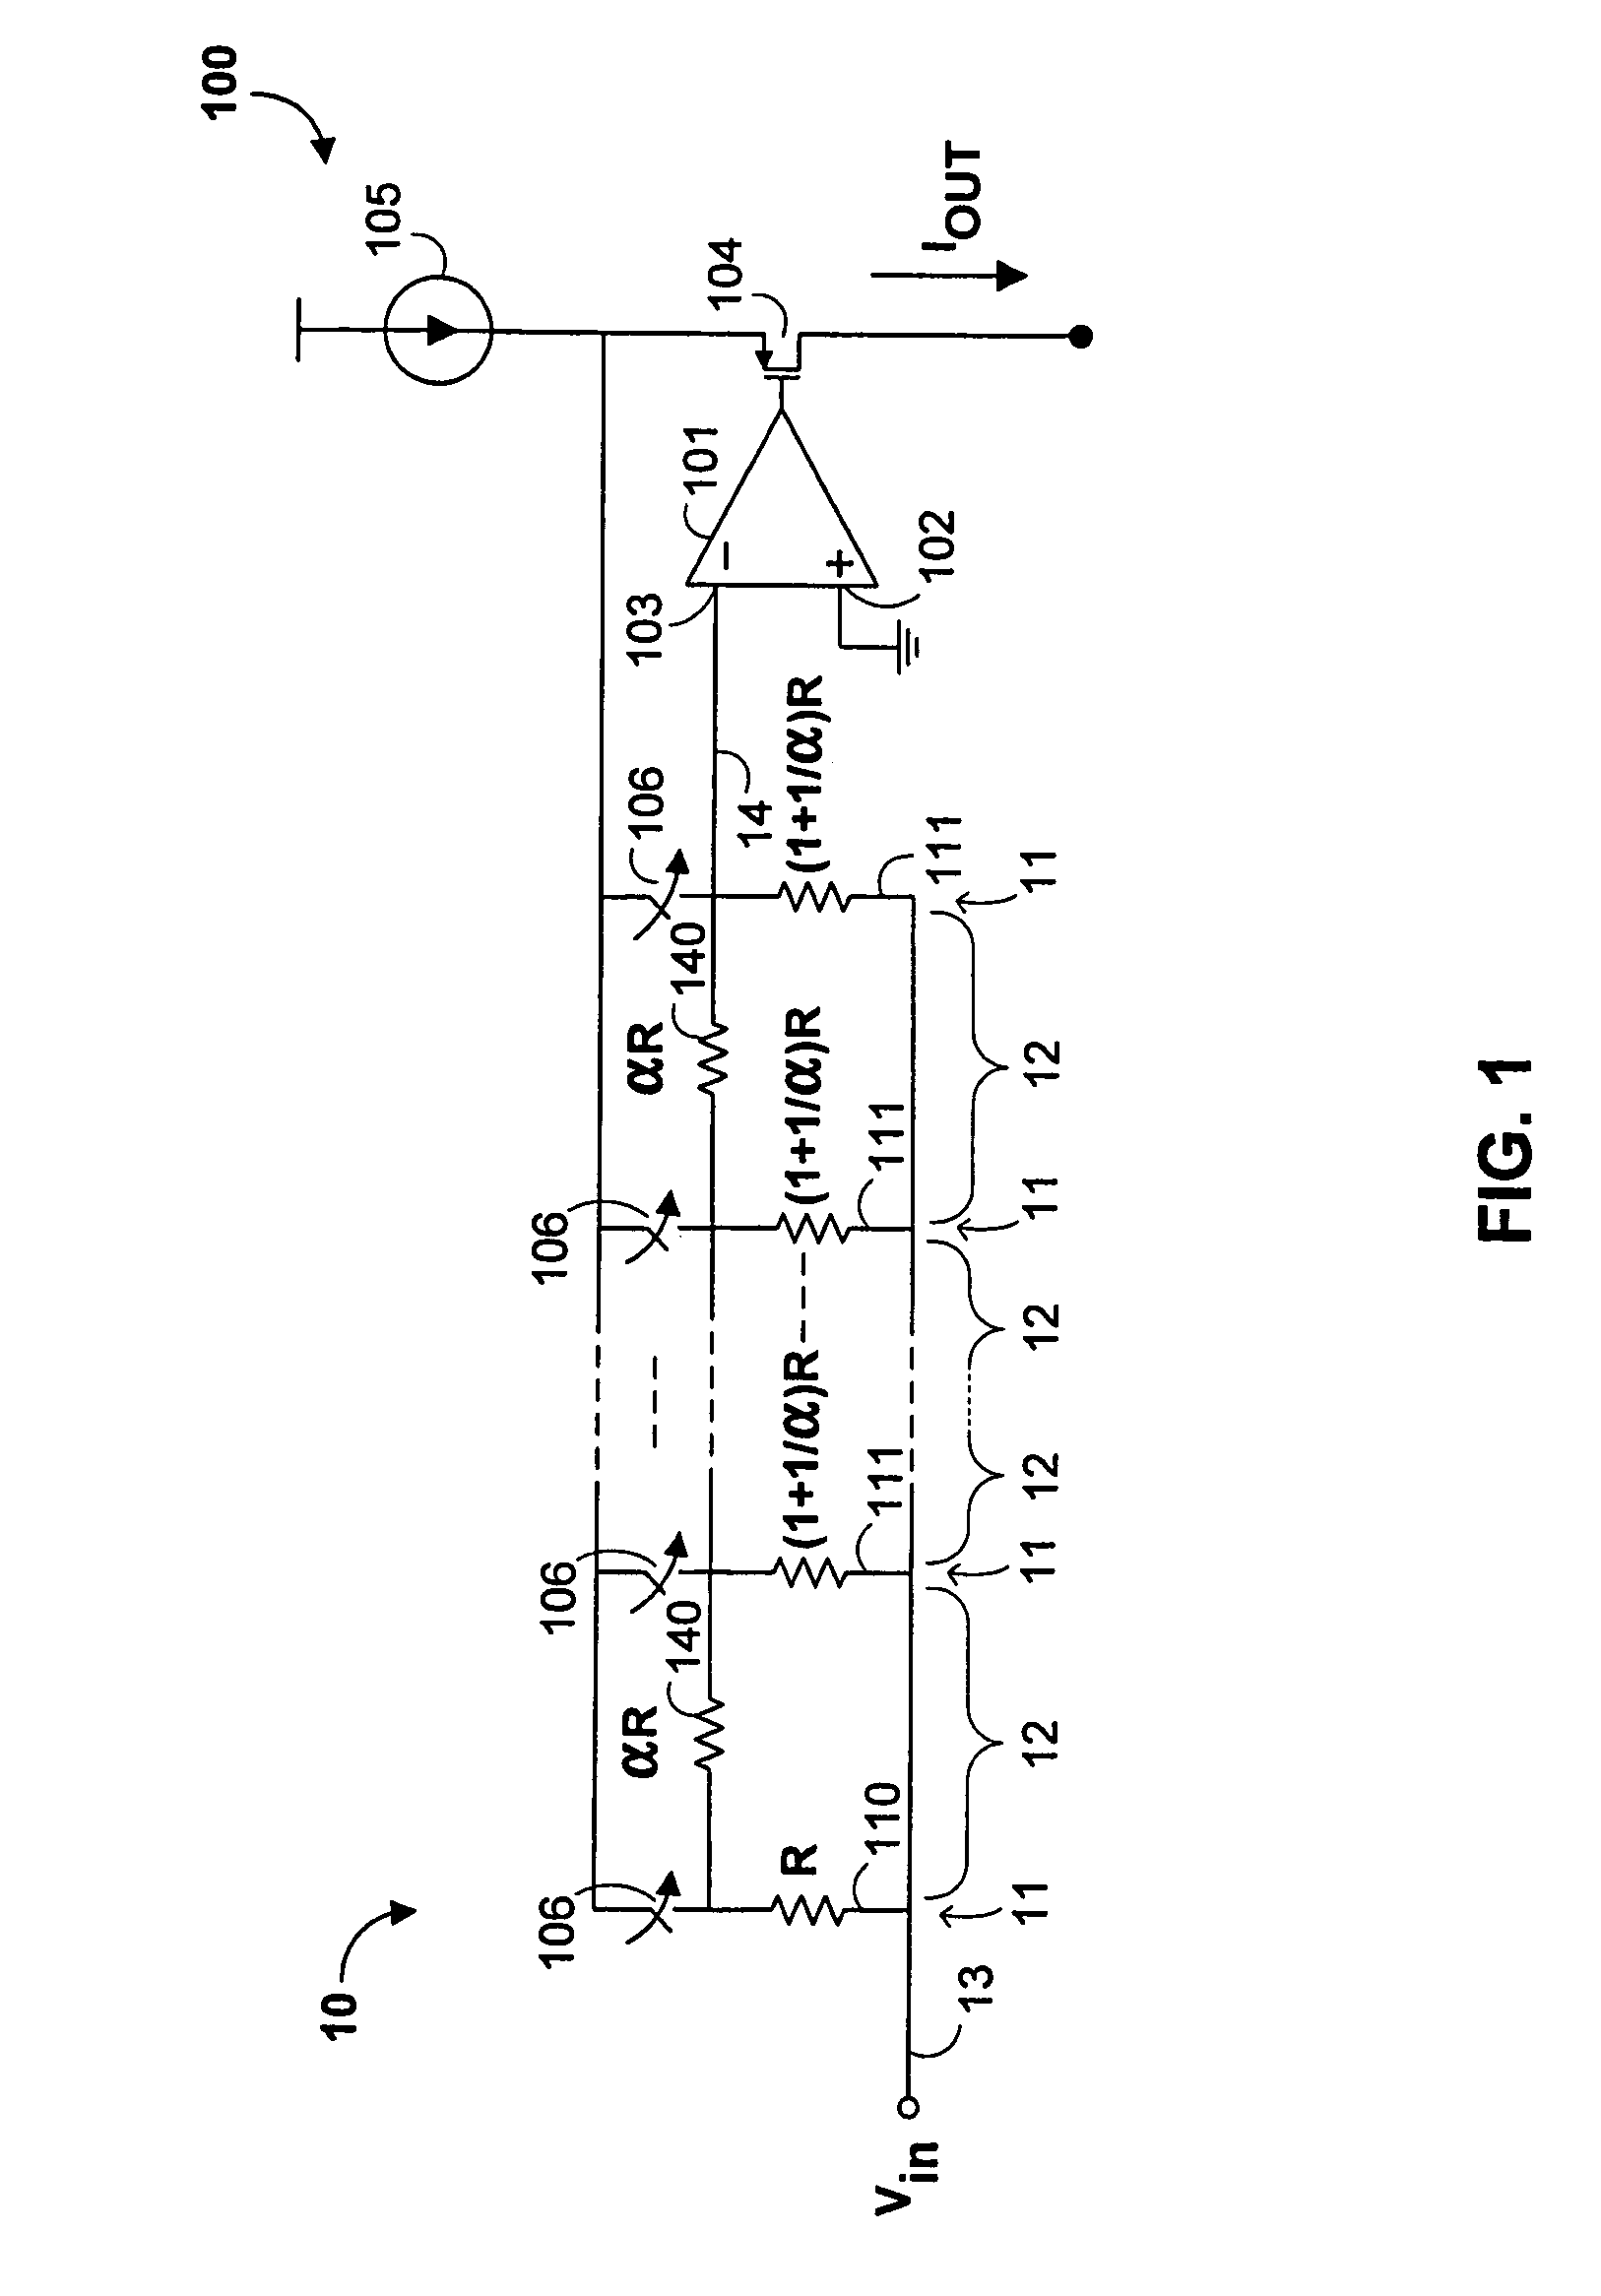 Linear-in-dB variable gain amplifier using geometric ladder circuit